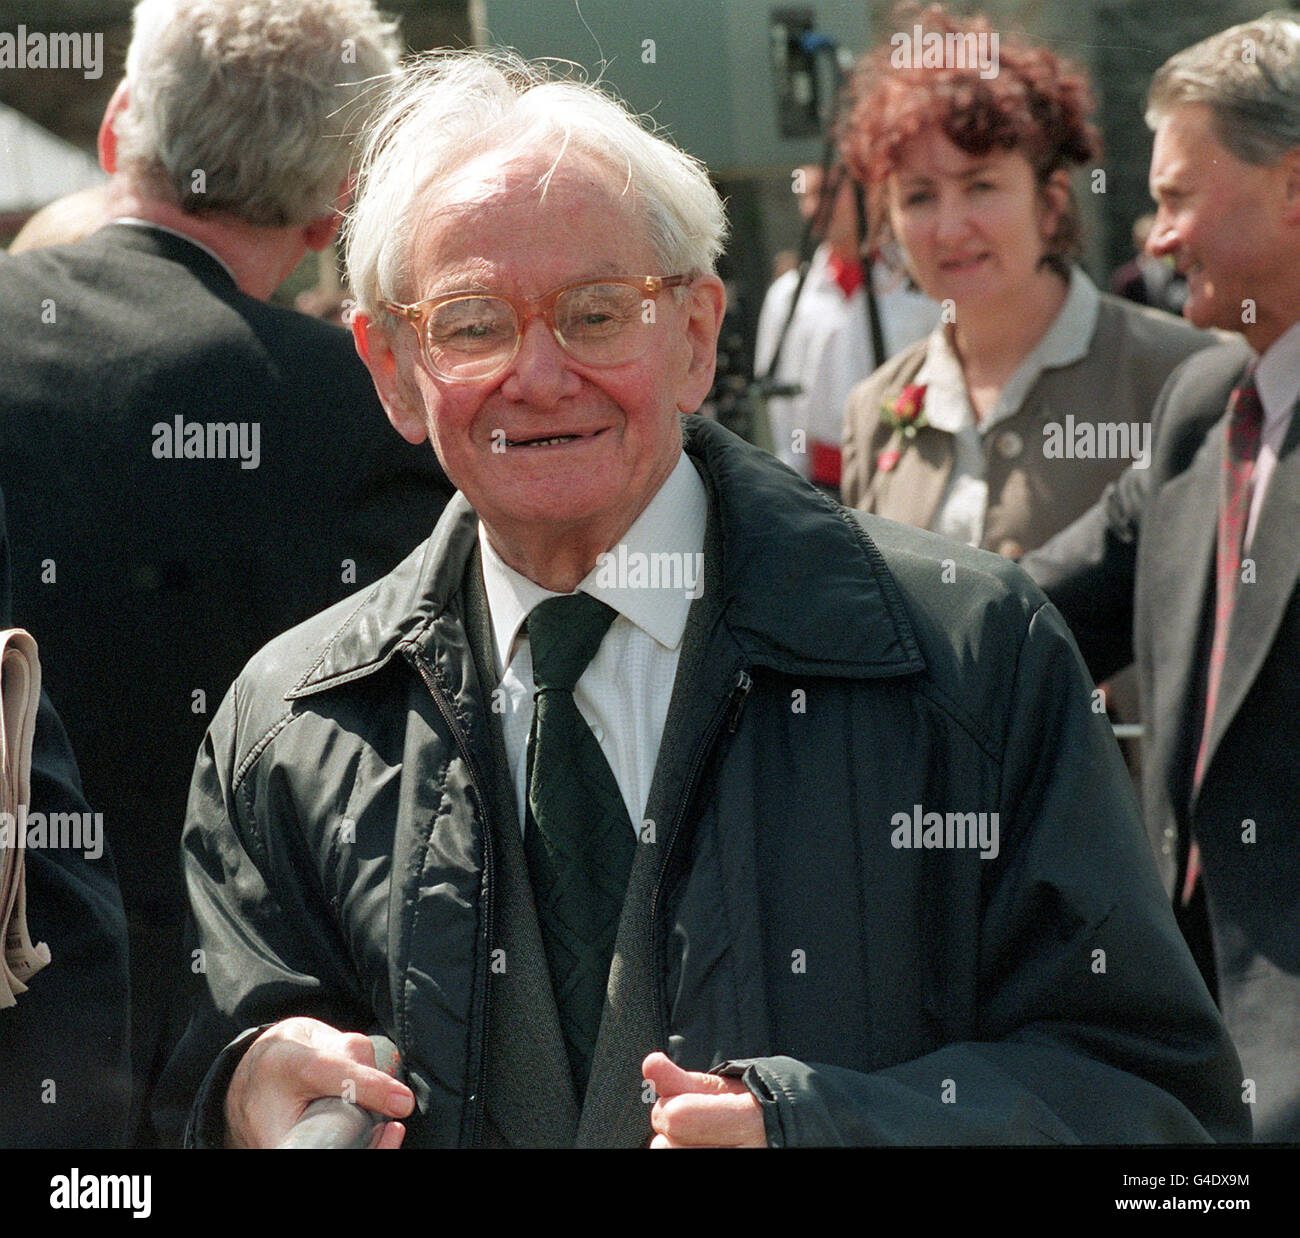 PA NEWS PHOTO 16/6/98  BERT PEARCE, WHO WAS MENTIONED BY SOUTH AFRICAN PRESIDENT NELSON MANDELA DURING HIS FREEDOM ACCEPTANCE SPEECH AT CARDIFF CASTLE Stock Photo